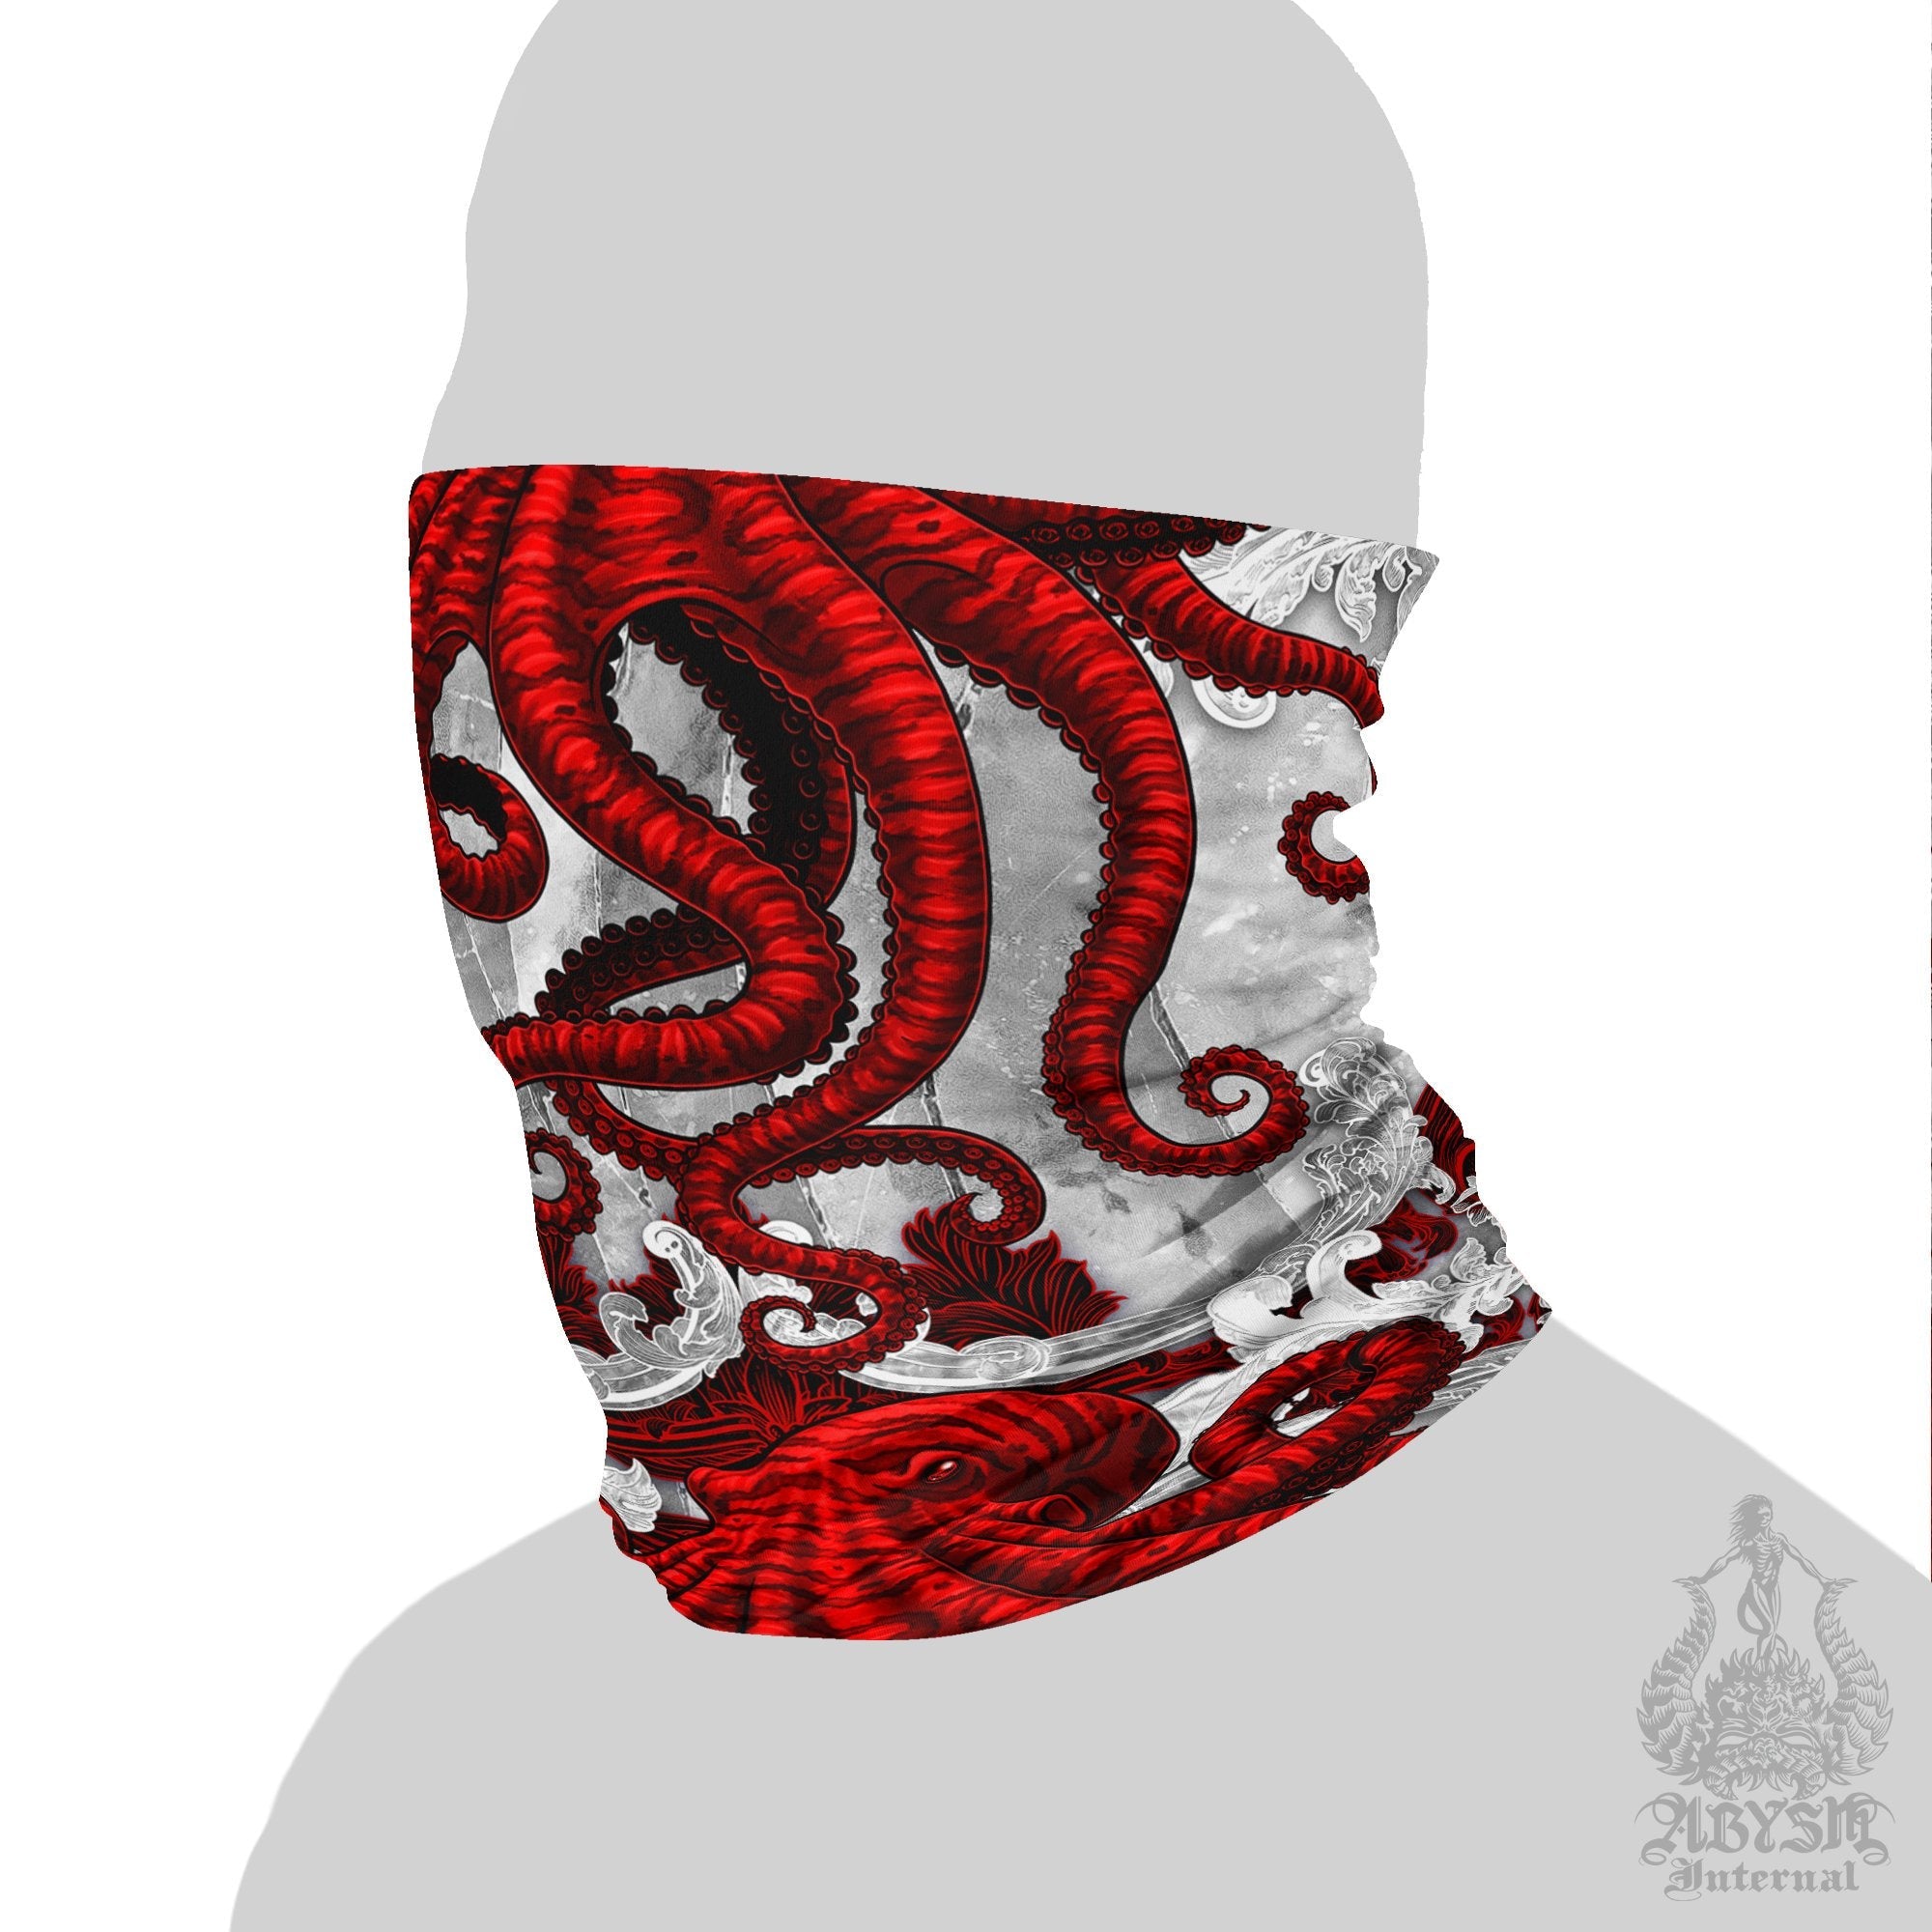 Octopus Neck Gaiter, Face Mask, Head Covering, Indie Outfit - Bloody - Abysm Internal